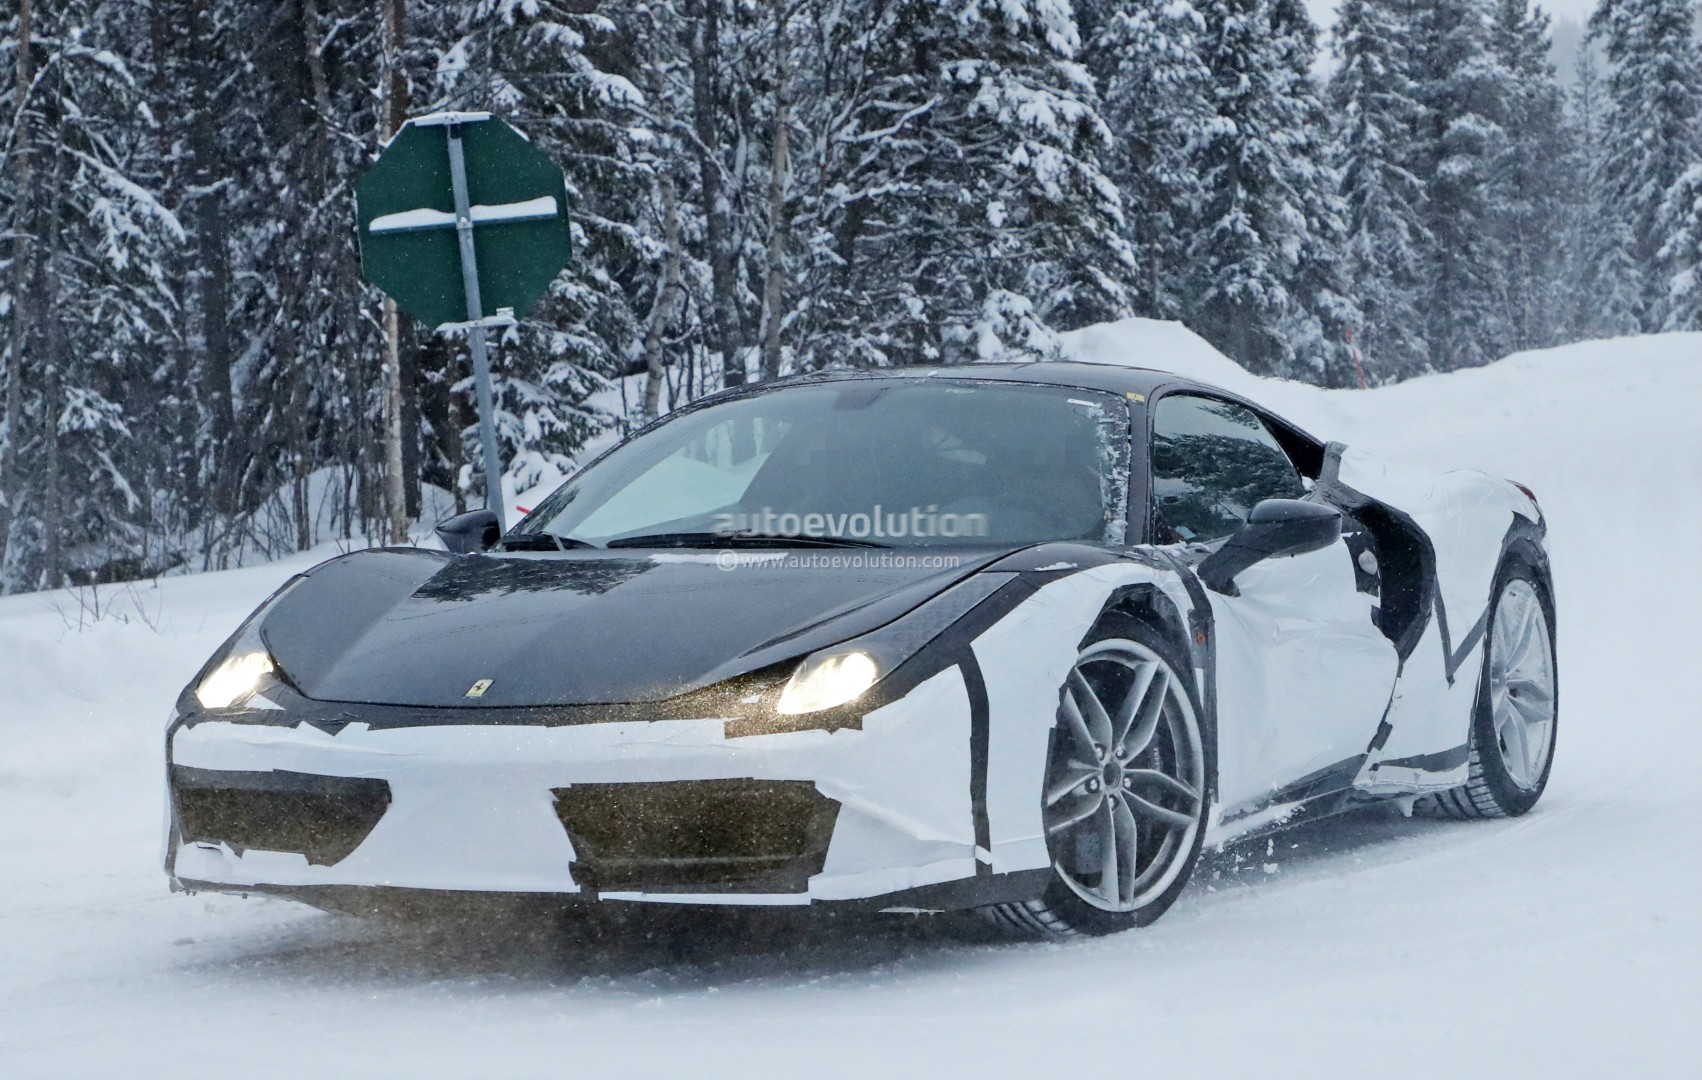 2019 - [Ferrari] Roma [F169] - Page 2 New-ferrari-dino-spied-testing-in-sweden-as-458-test-mule-with-v6-soundtrack_2